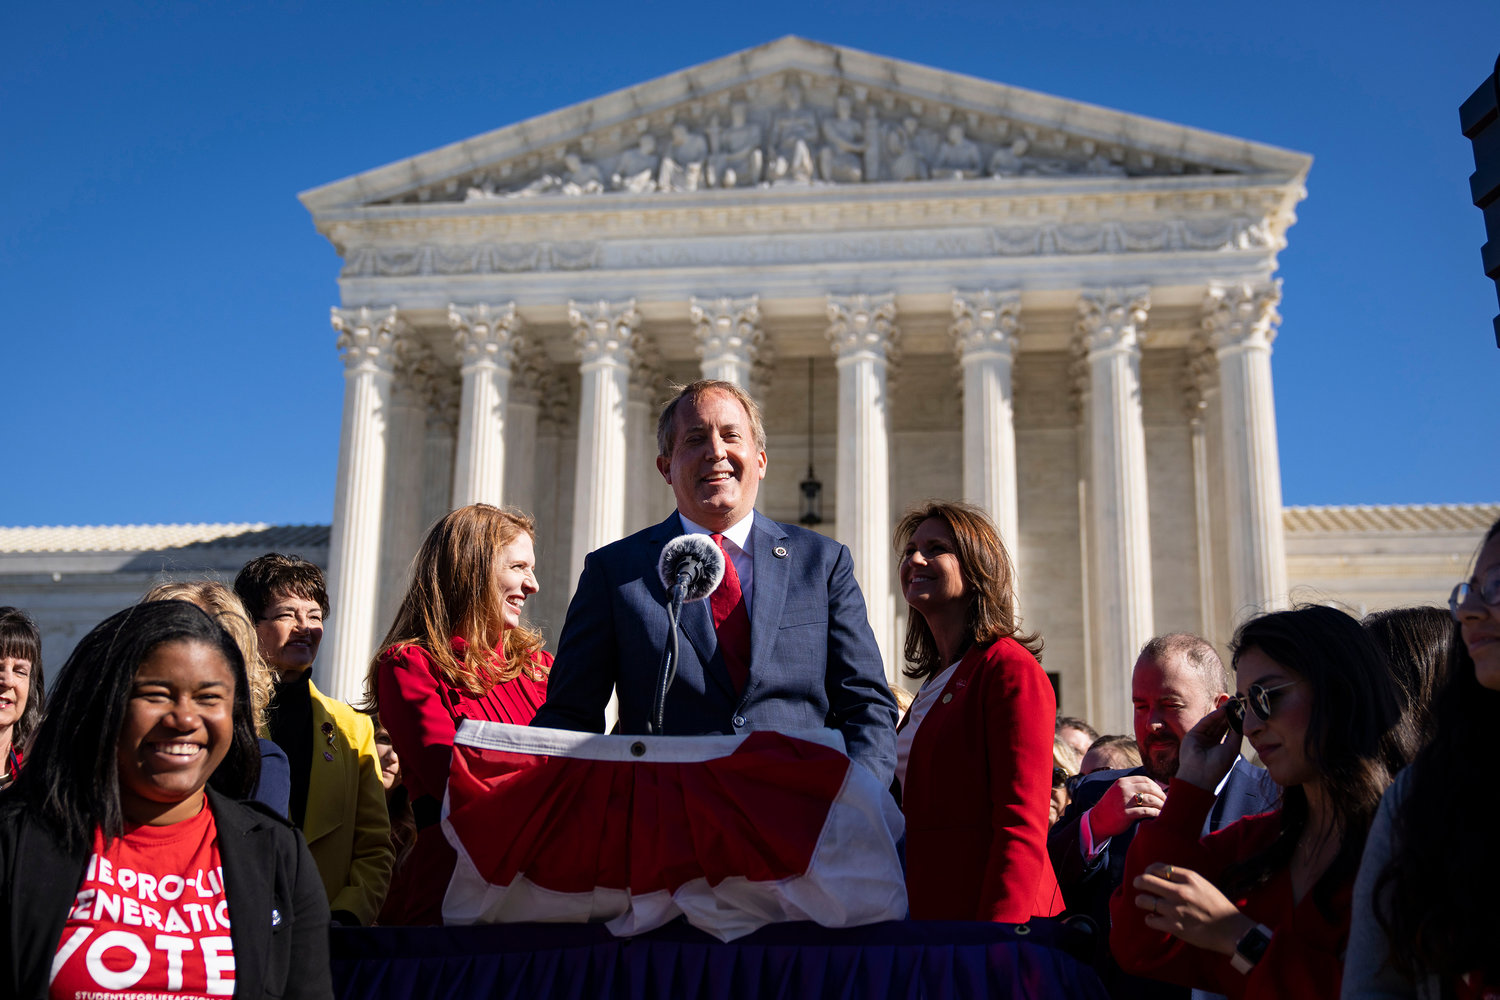 Texas Attorney General Ken Paxton speaks outside the U.S. Supreme Court on Nov. 1, 2021, in Washington, D.C. On Monday, the Supreme Court heard arguments in a challenge to the controversial Texas abortion law, which bans abortions after six weeks. (Drew Angerer/Getty Images/TNS)